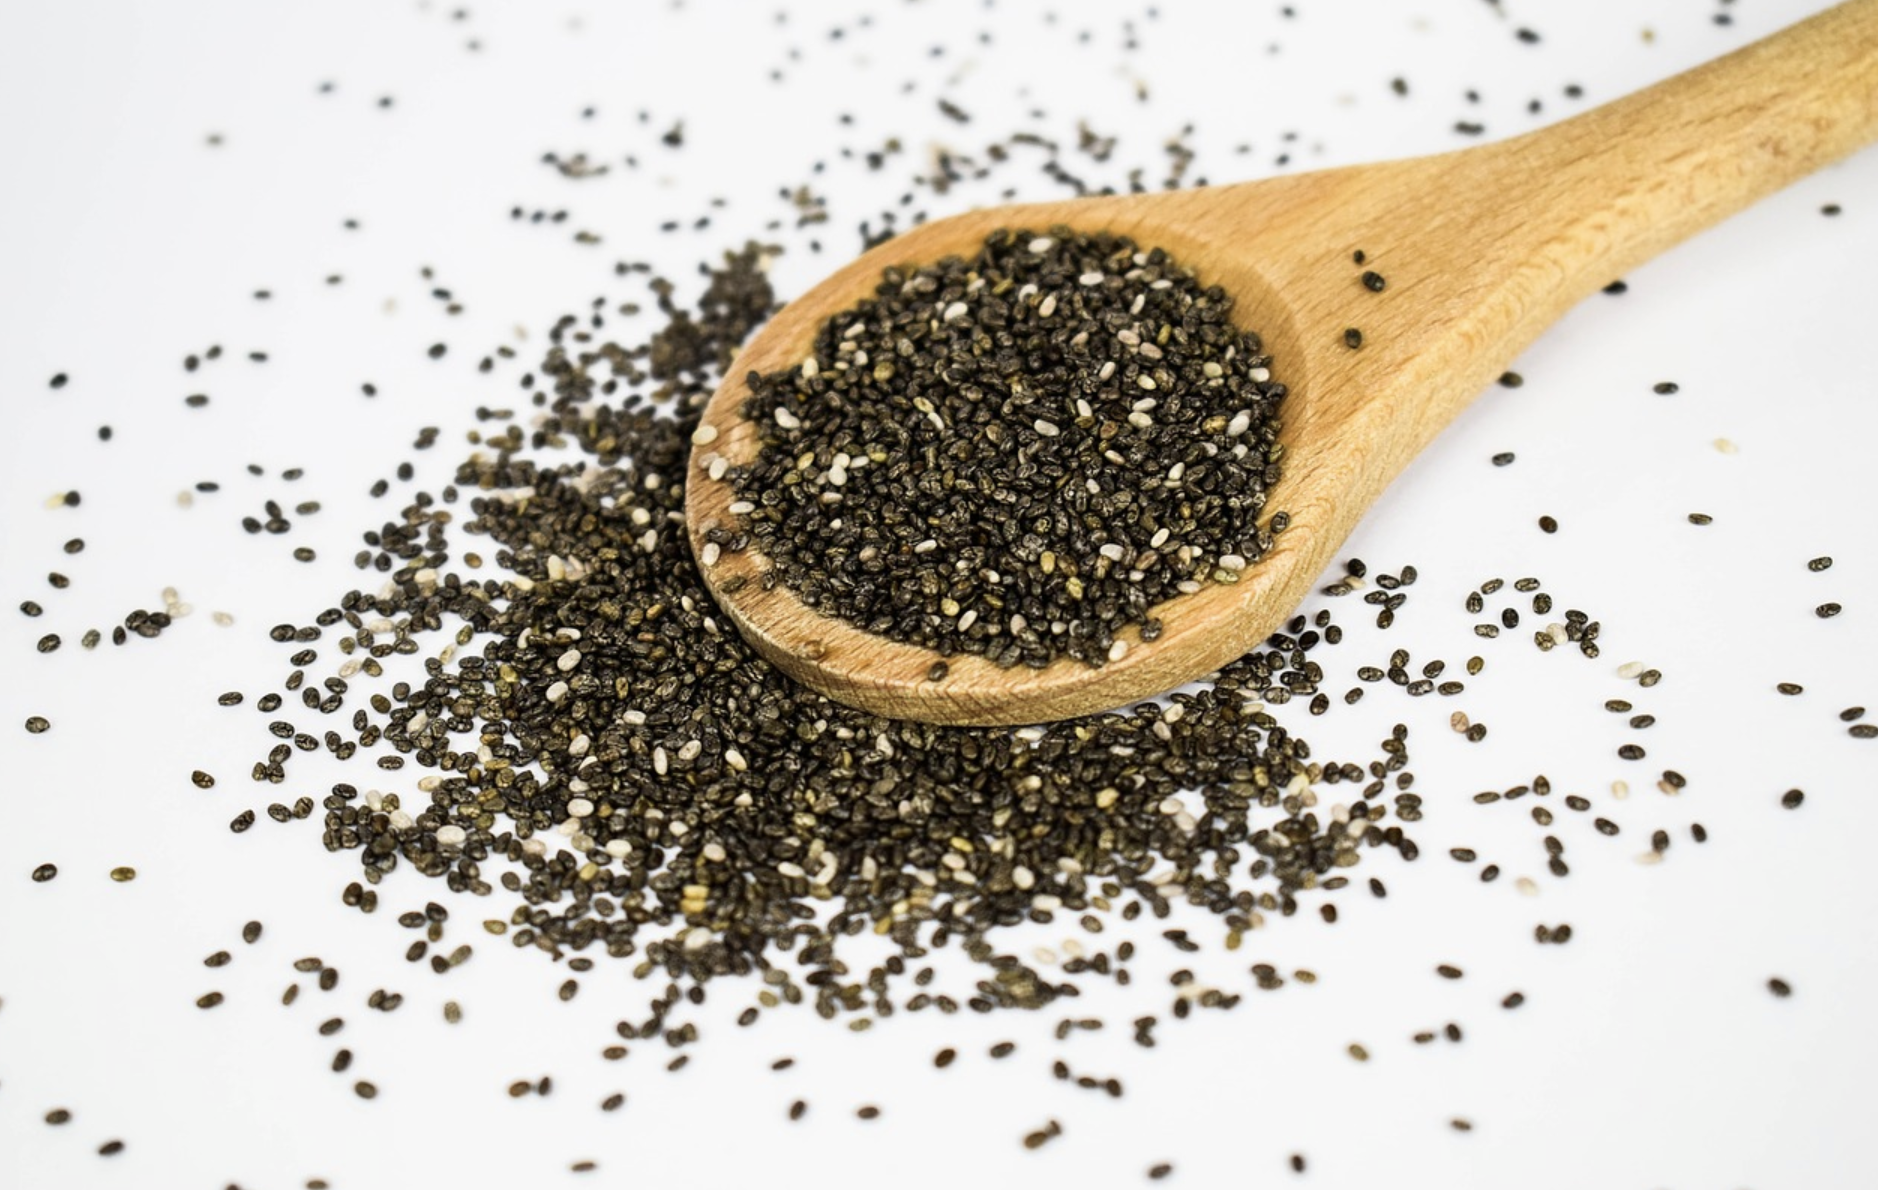 What is Chia Good For?